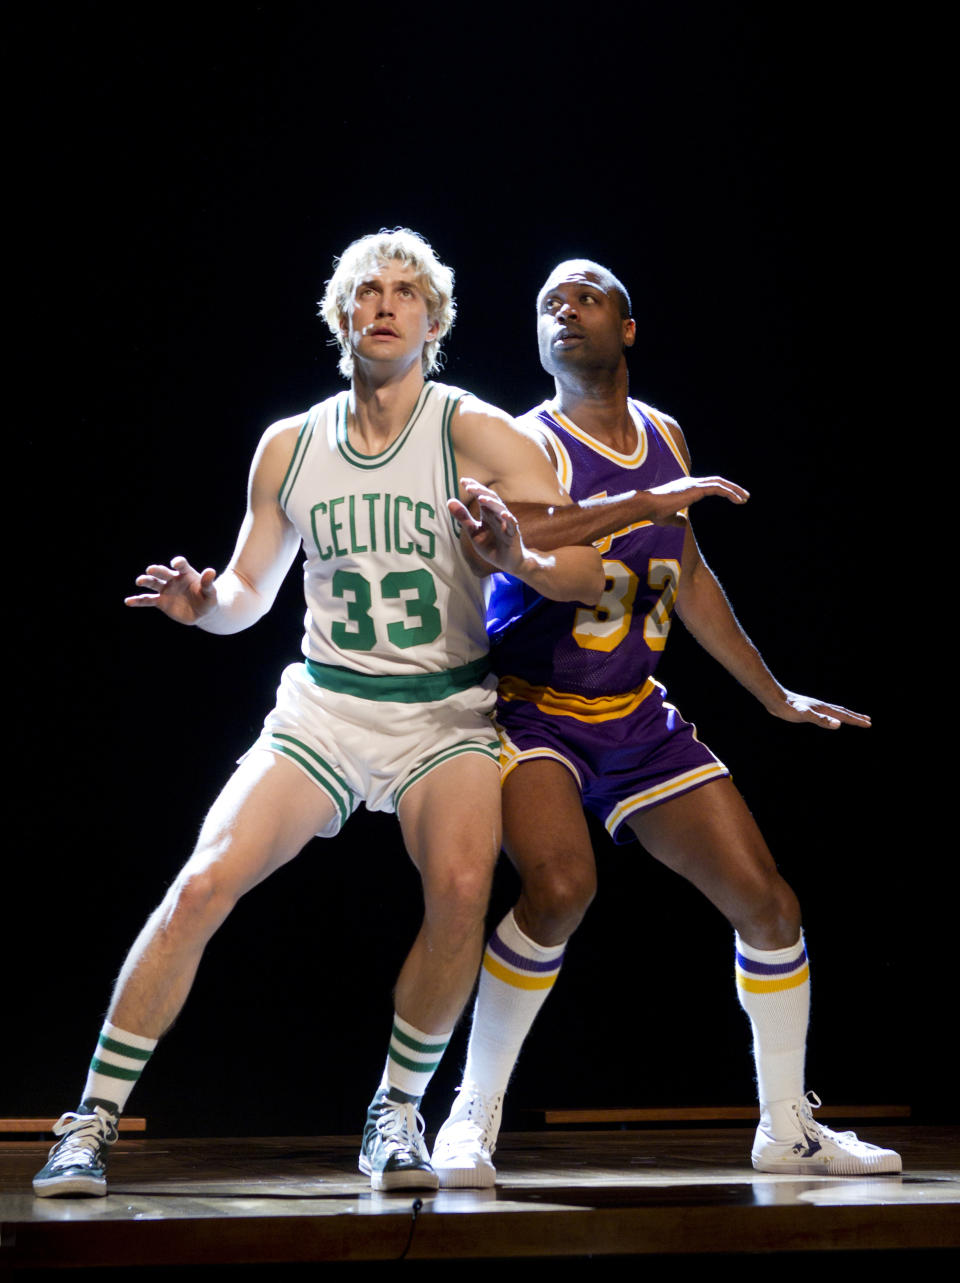 This undated publicity image provided by Kirmser/Ponturo Group, LLC shows Tug Coker, as Larry Bird, left, and Kevin Daniels, as Earvin "Magic" Johnson, in a scene from "Magic/Bird," a new play opening on Broadway on Wednesday, April 10, 2012. (AP Photo/Kirmser/Ponturo Group, LLC, Joan Marcus)